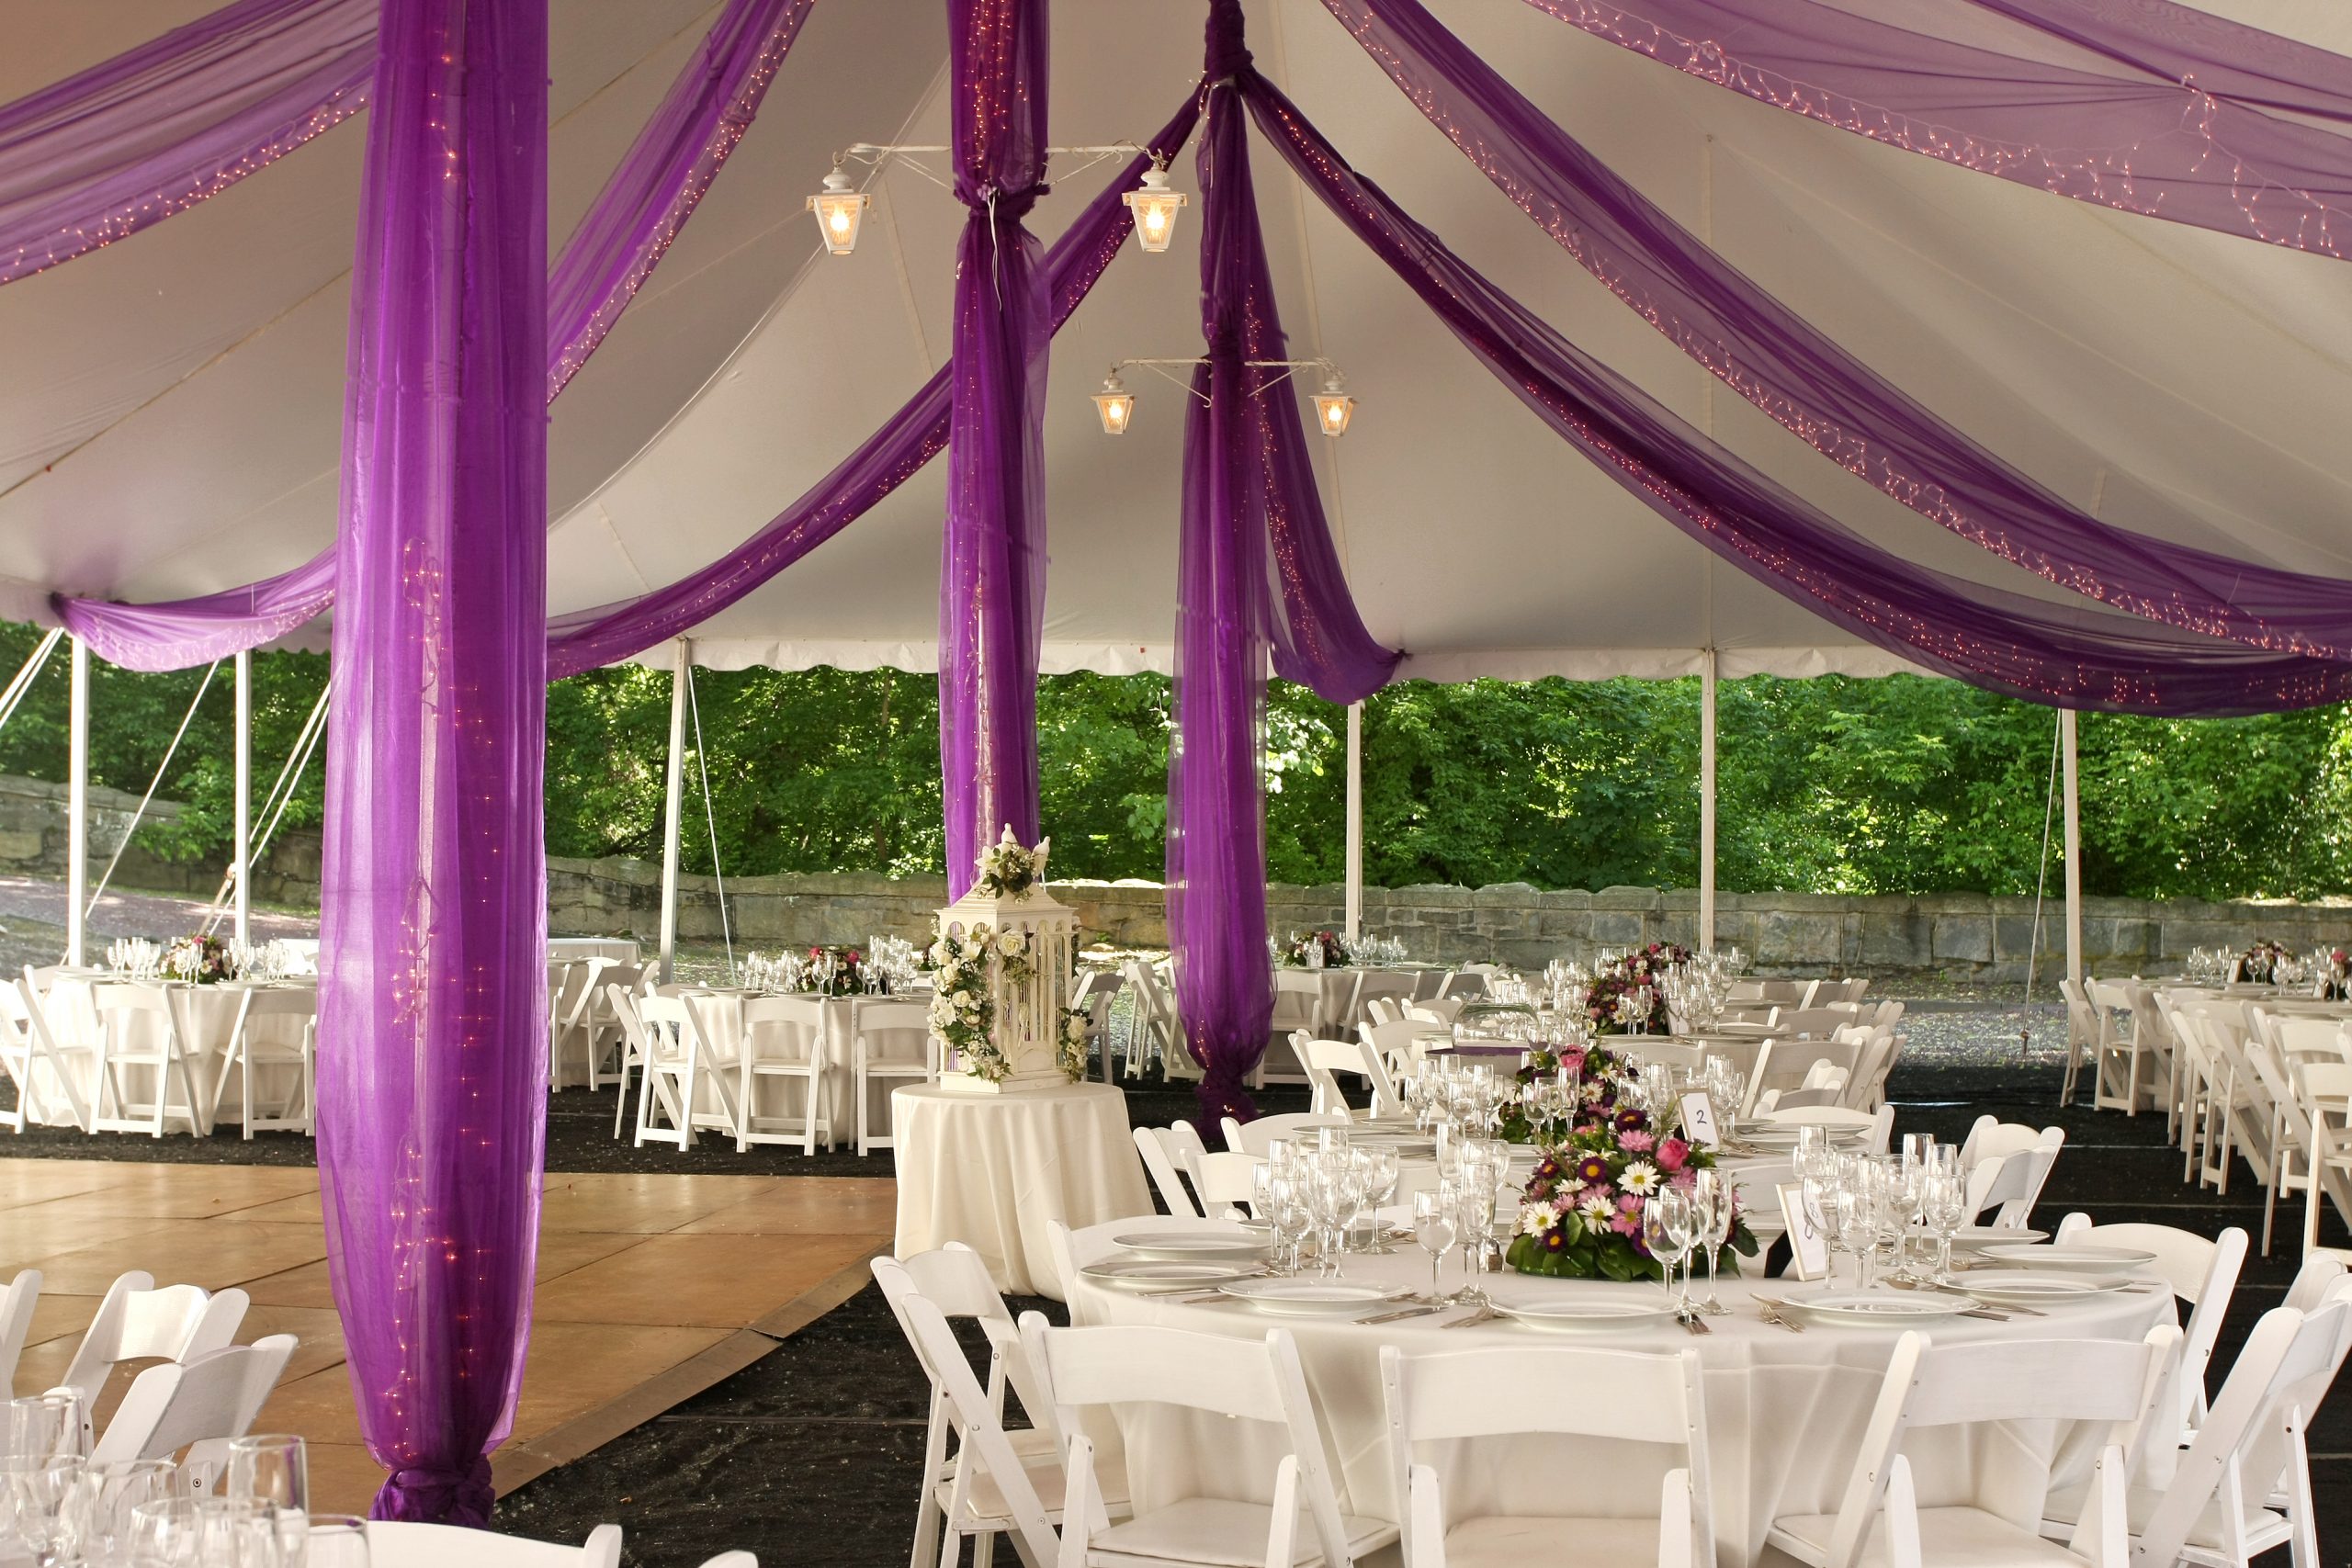 Marquee event